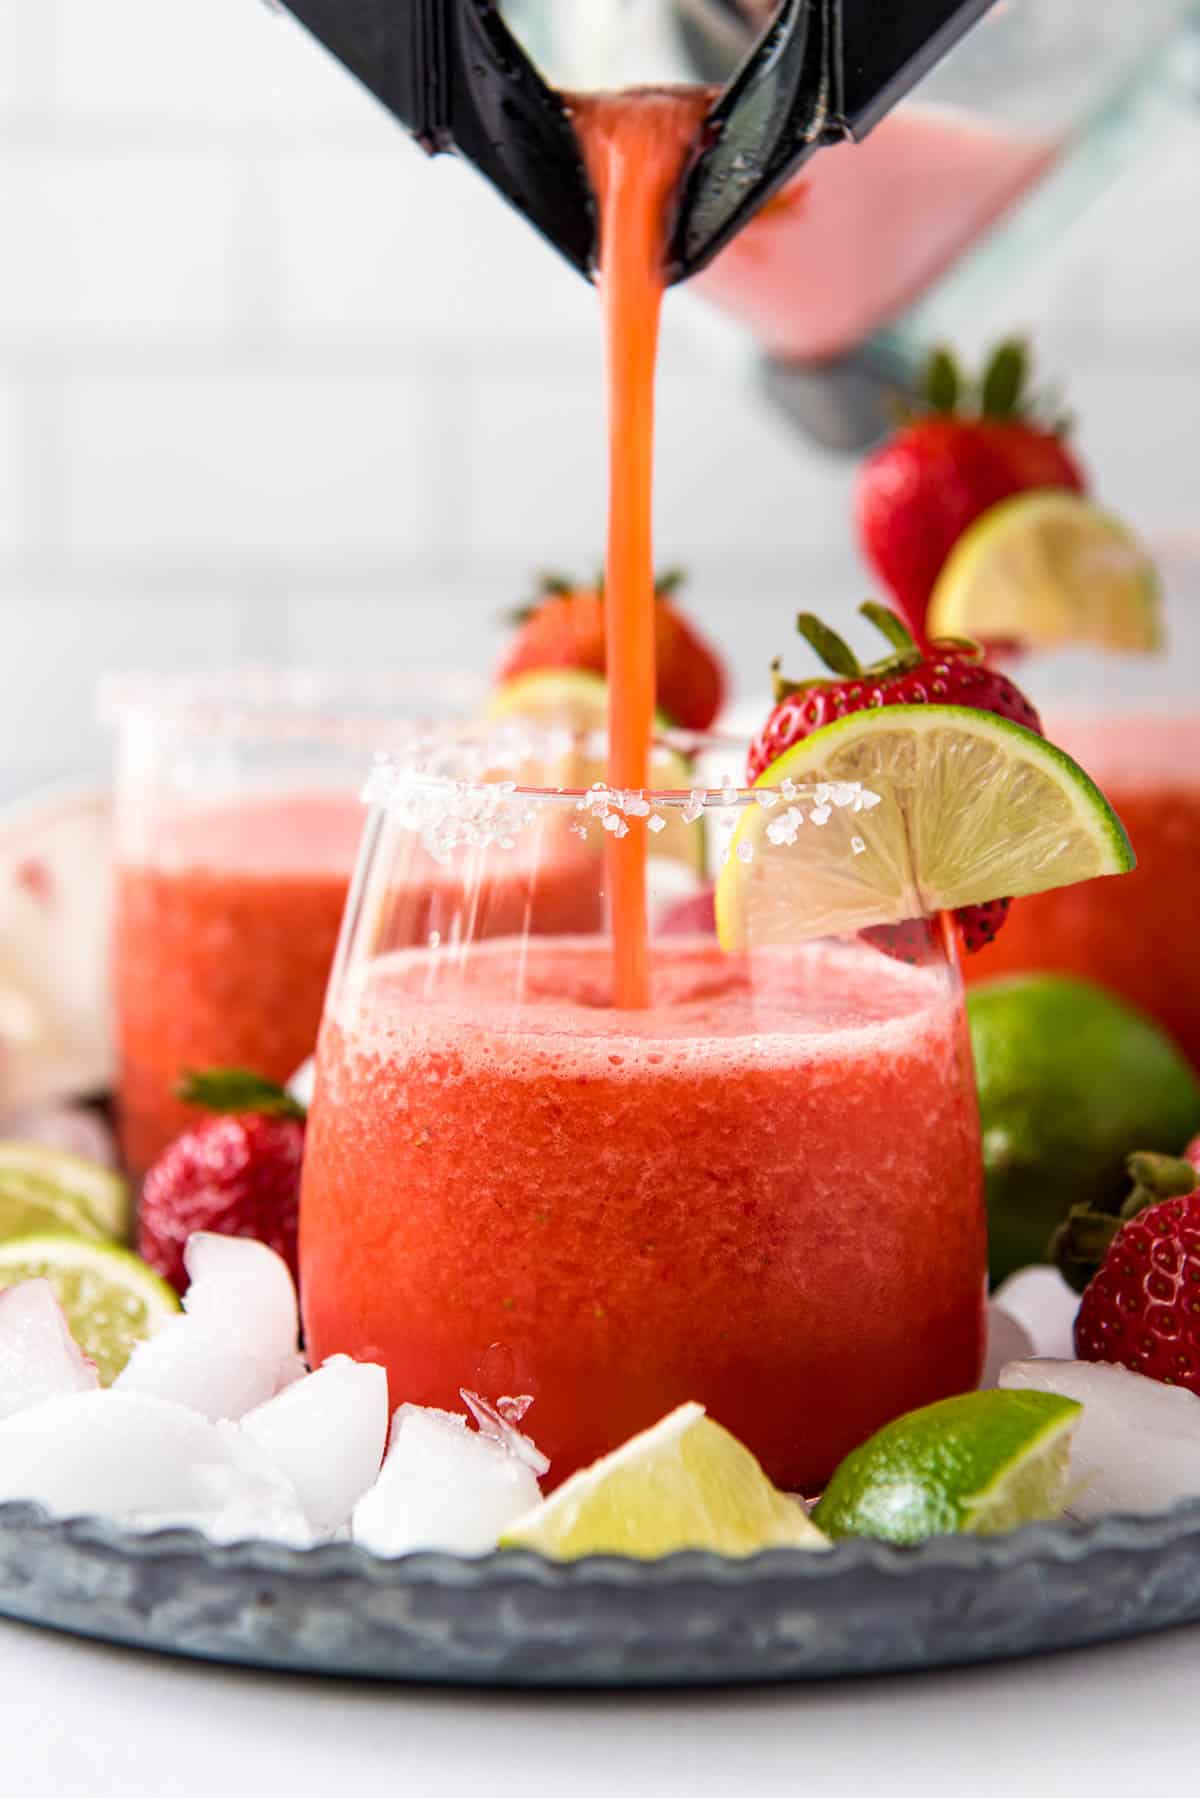 Pouring a frozen strawberry margarita into a glass for serving.